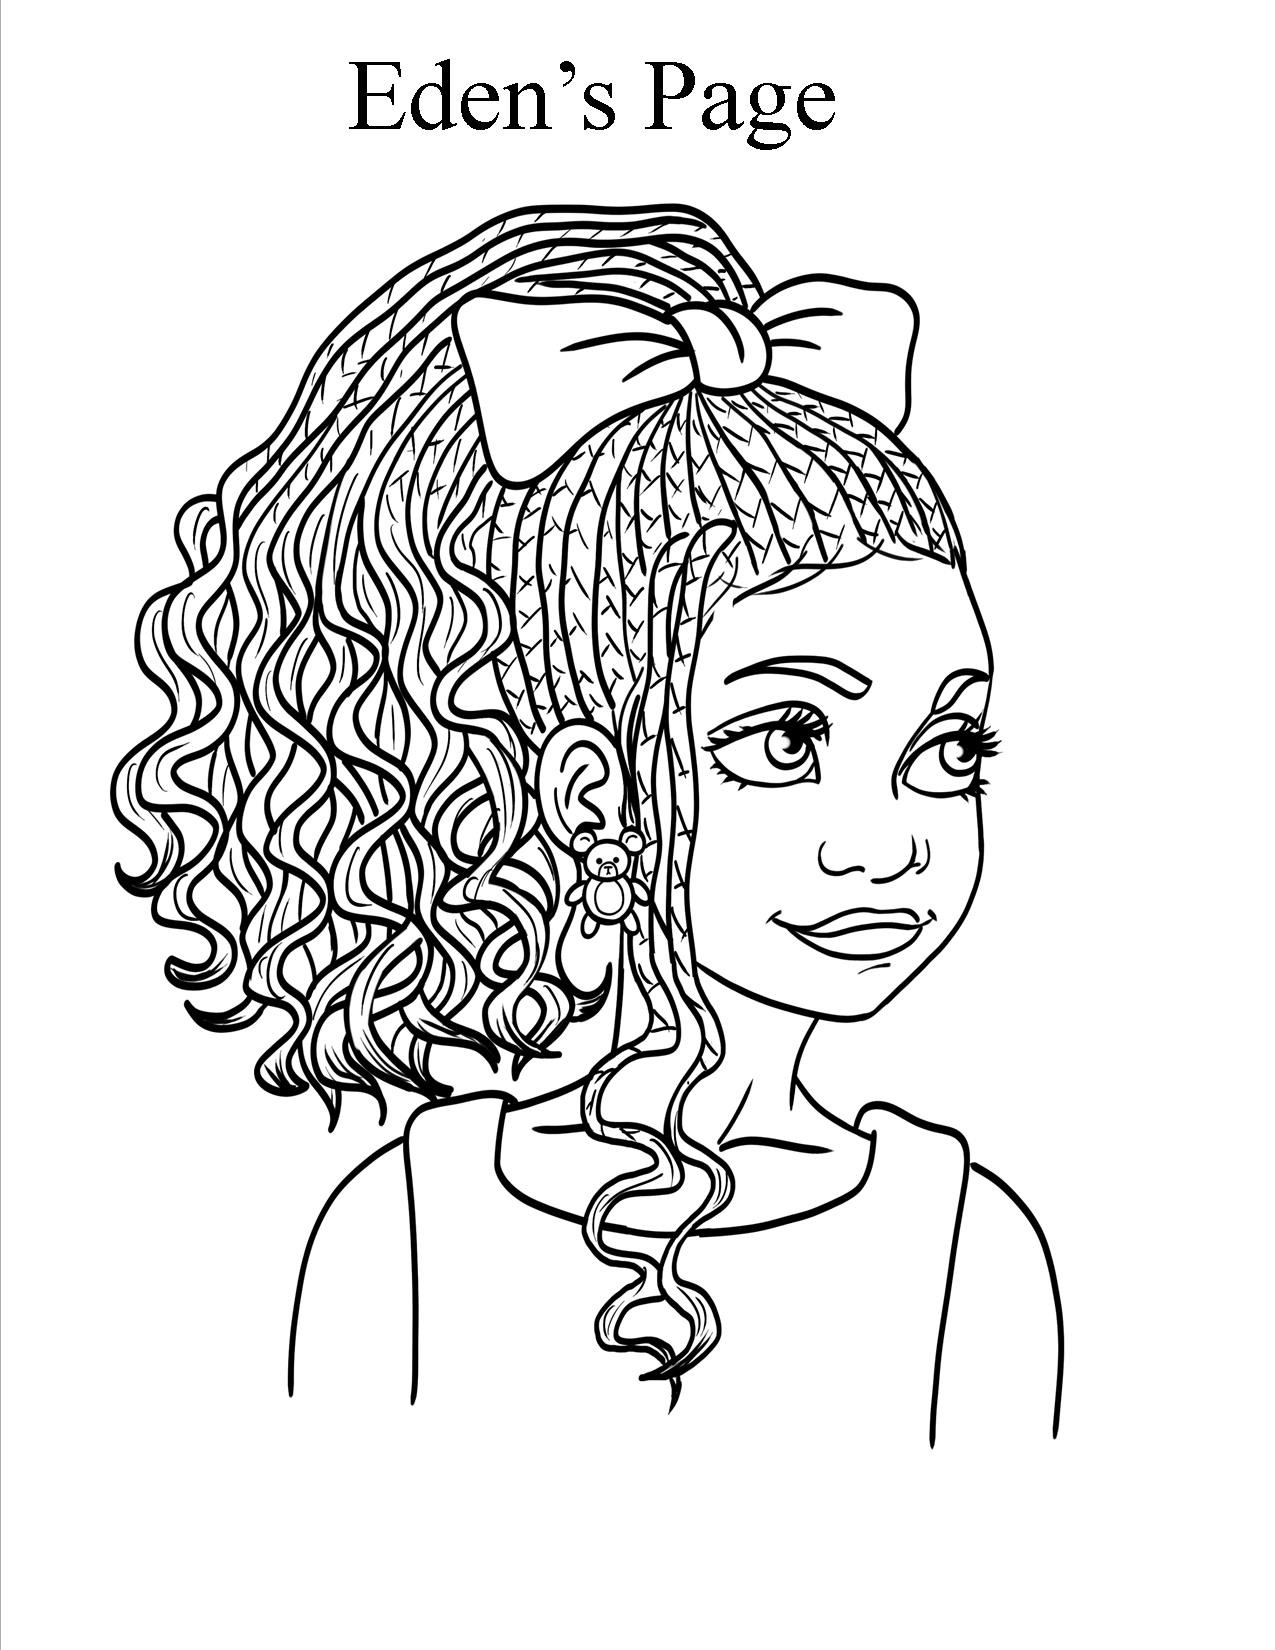 The Best Ideas for Black Girls Coloring Pages Home, Family, Style and